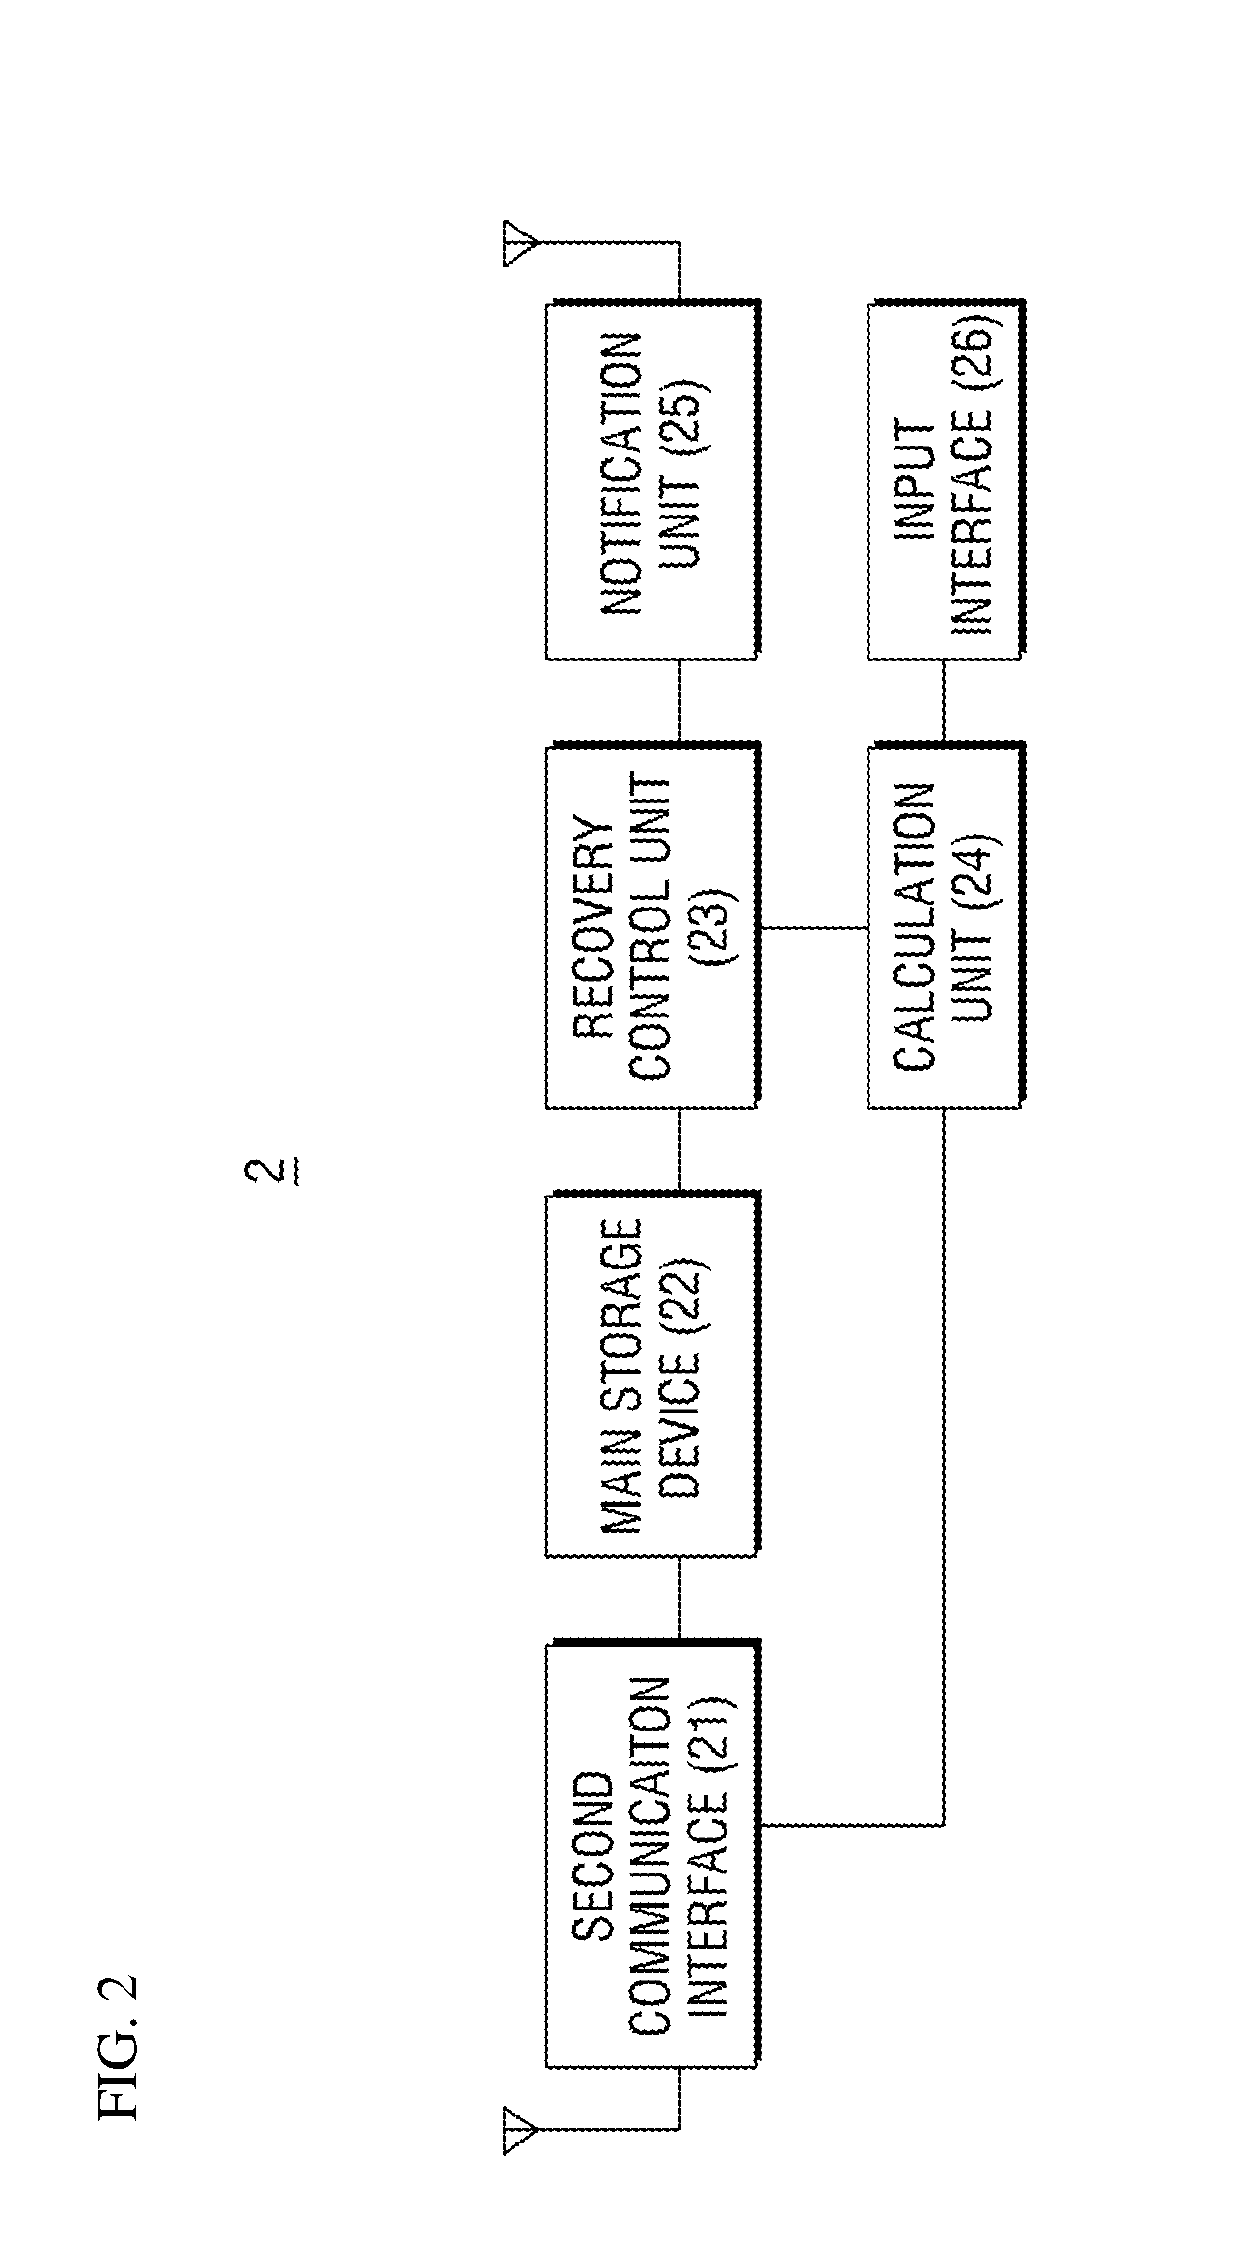 Monitoring camera system and method capable of recording images during storage device recovery